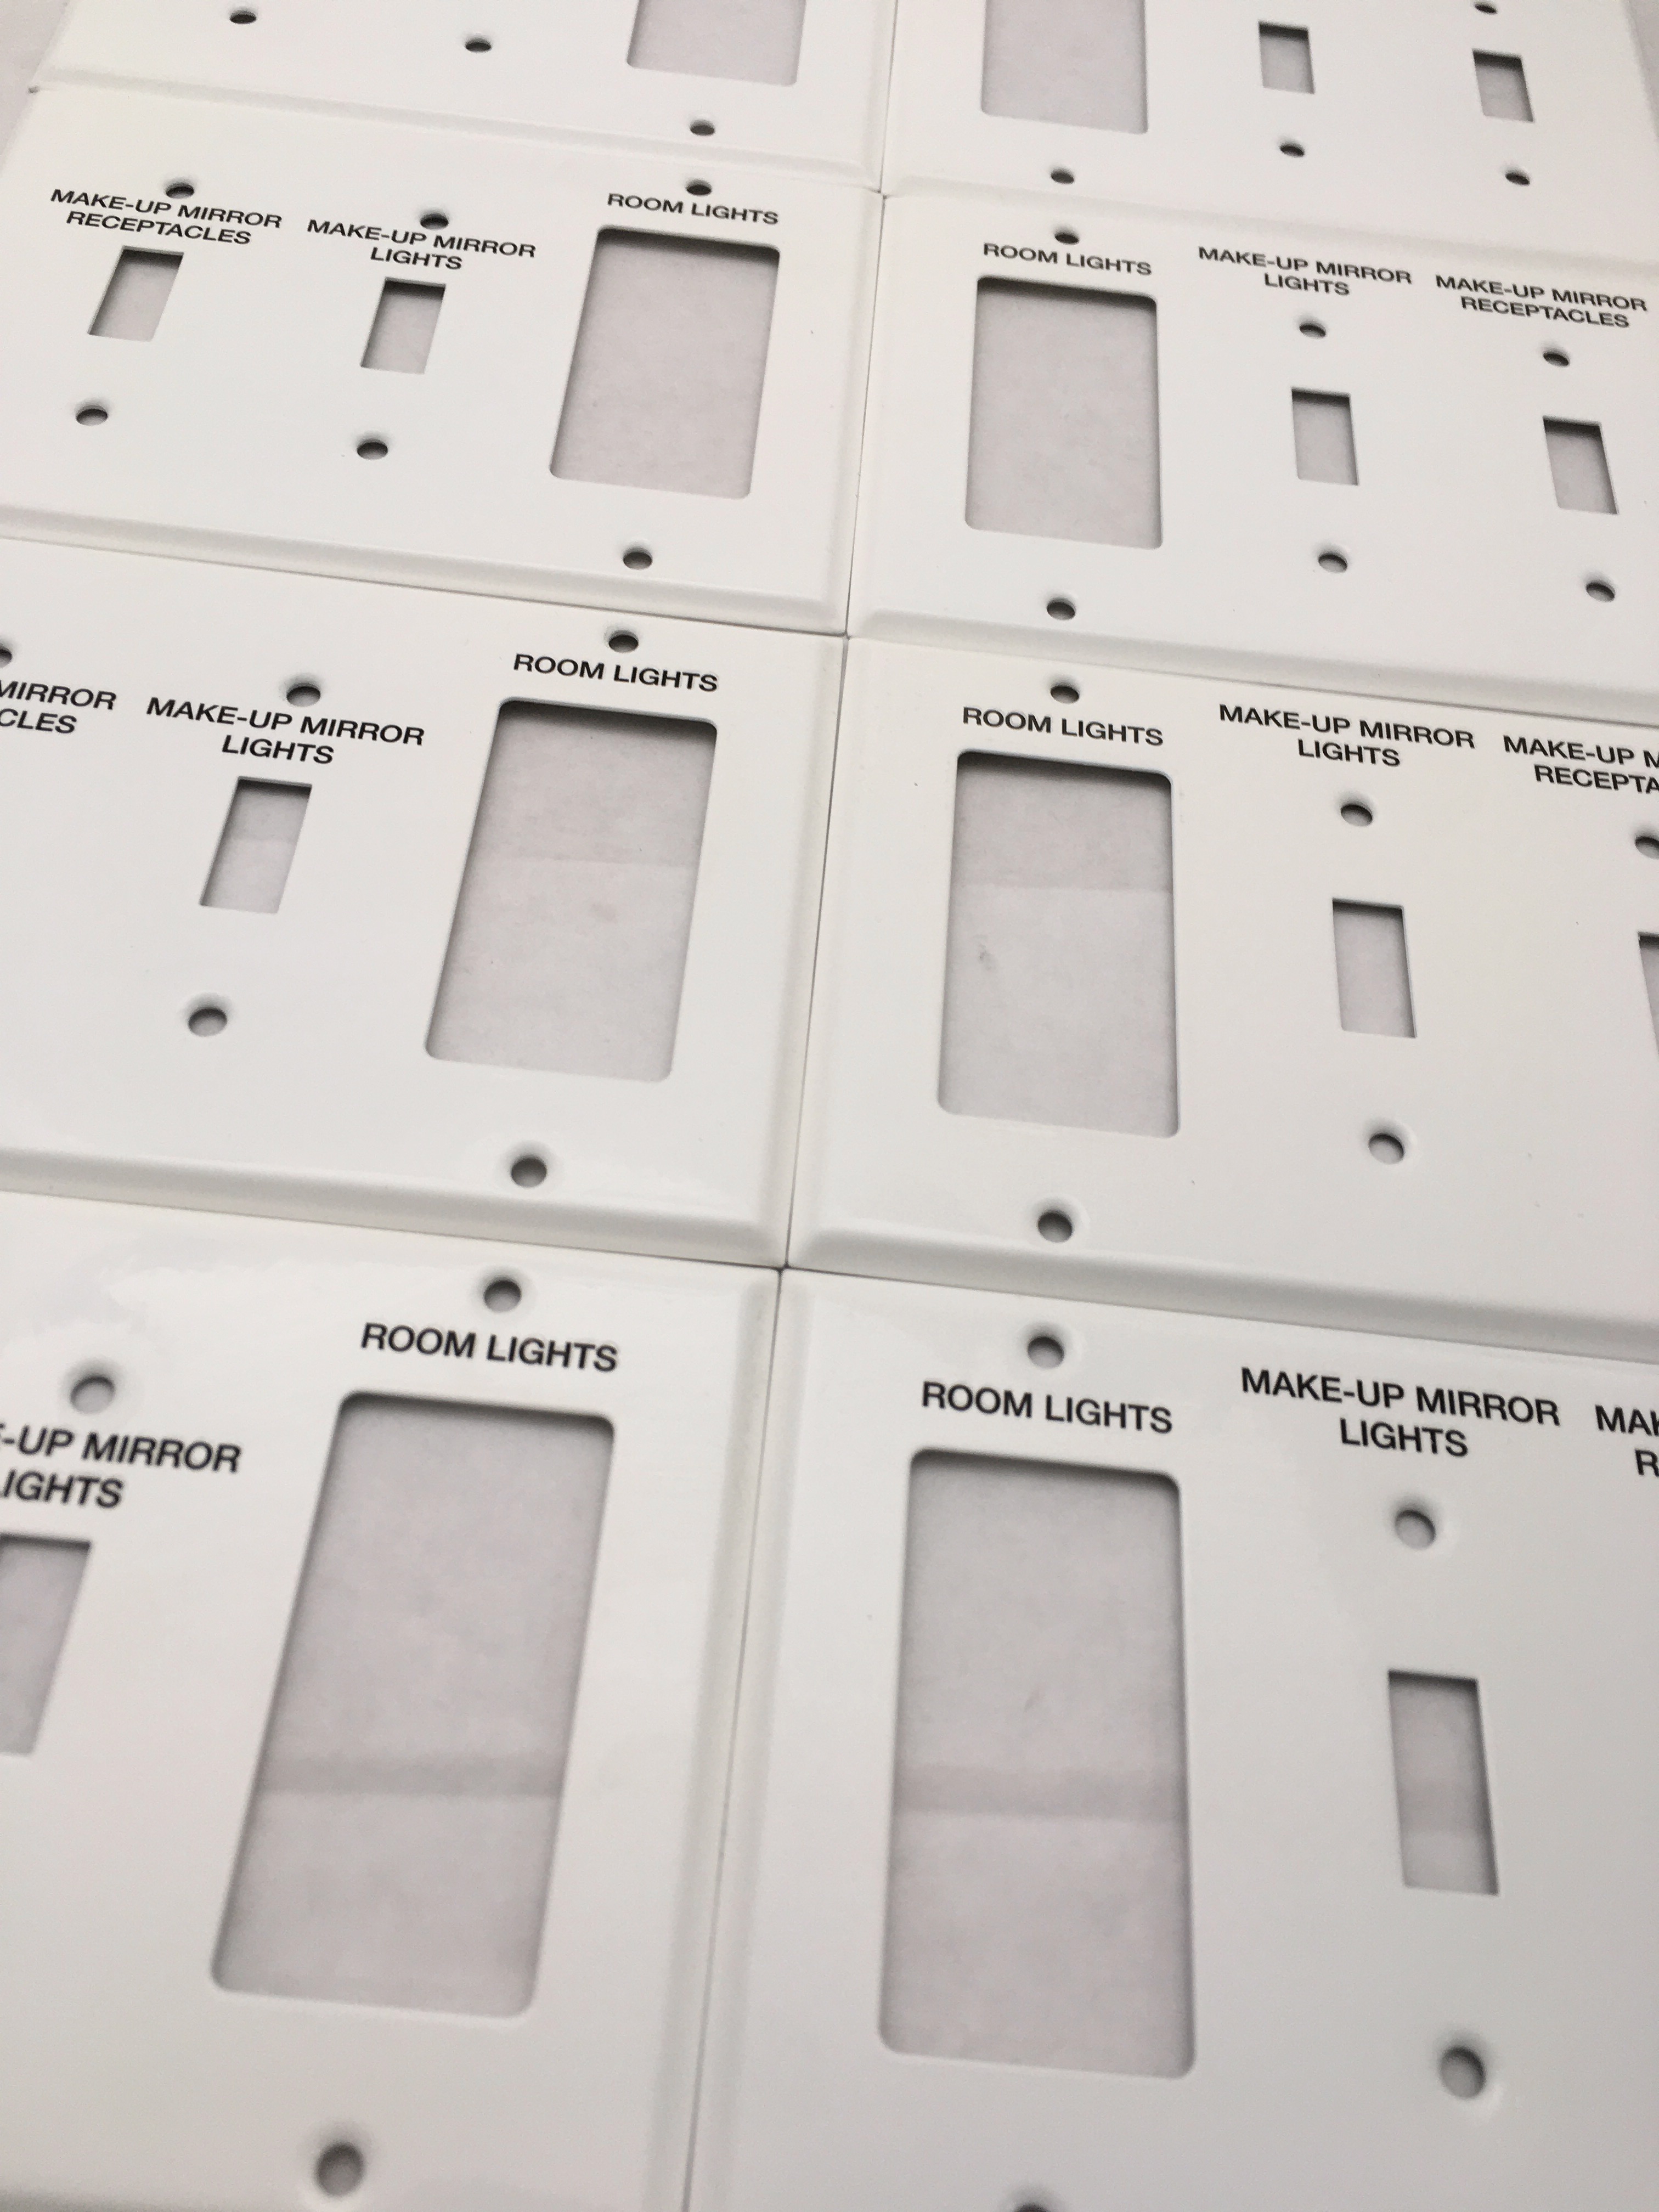 Engraving Stainless Steel Switch Plates - What you need to know!